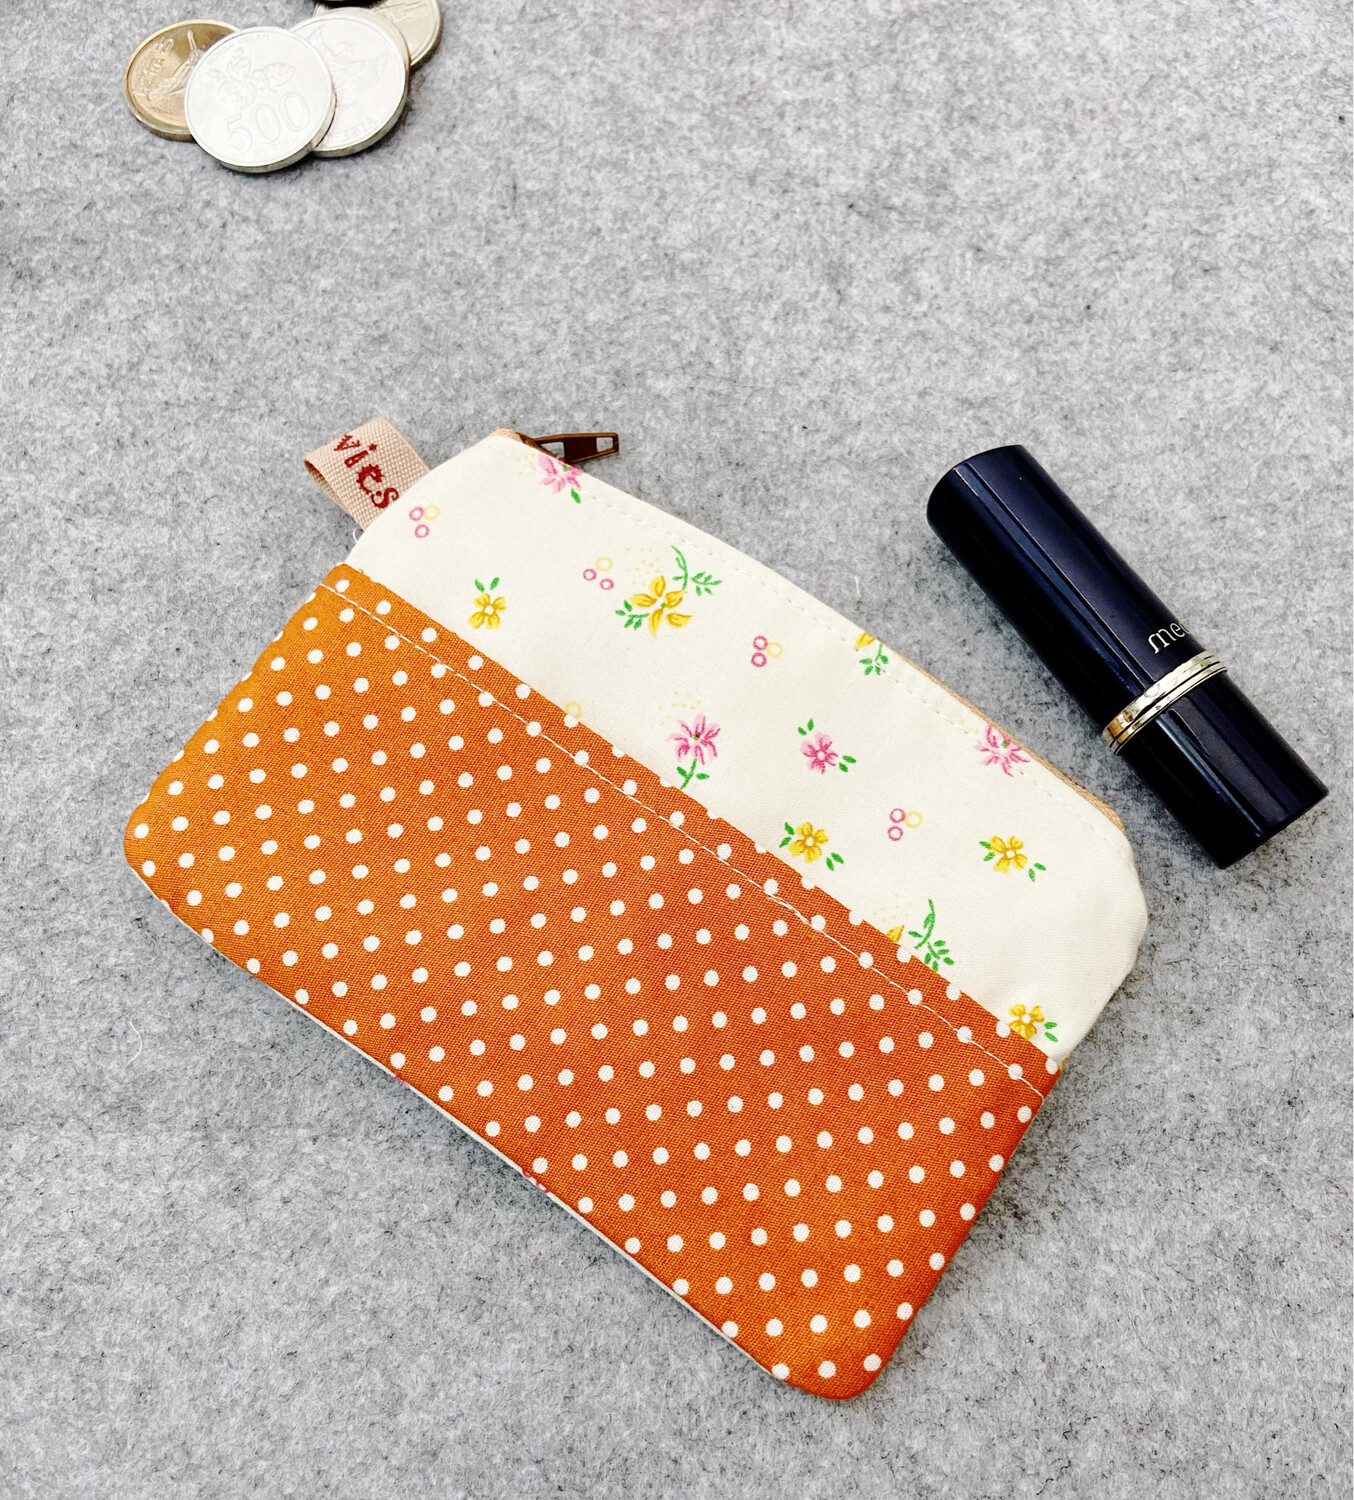 Mini Cute Zipper Pouch with Tissue Holder - Tiny Floral Polkadots